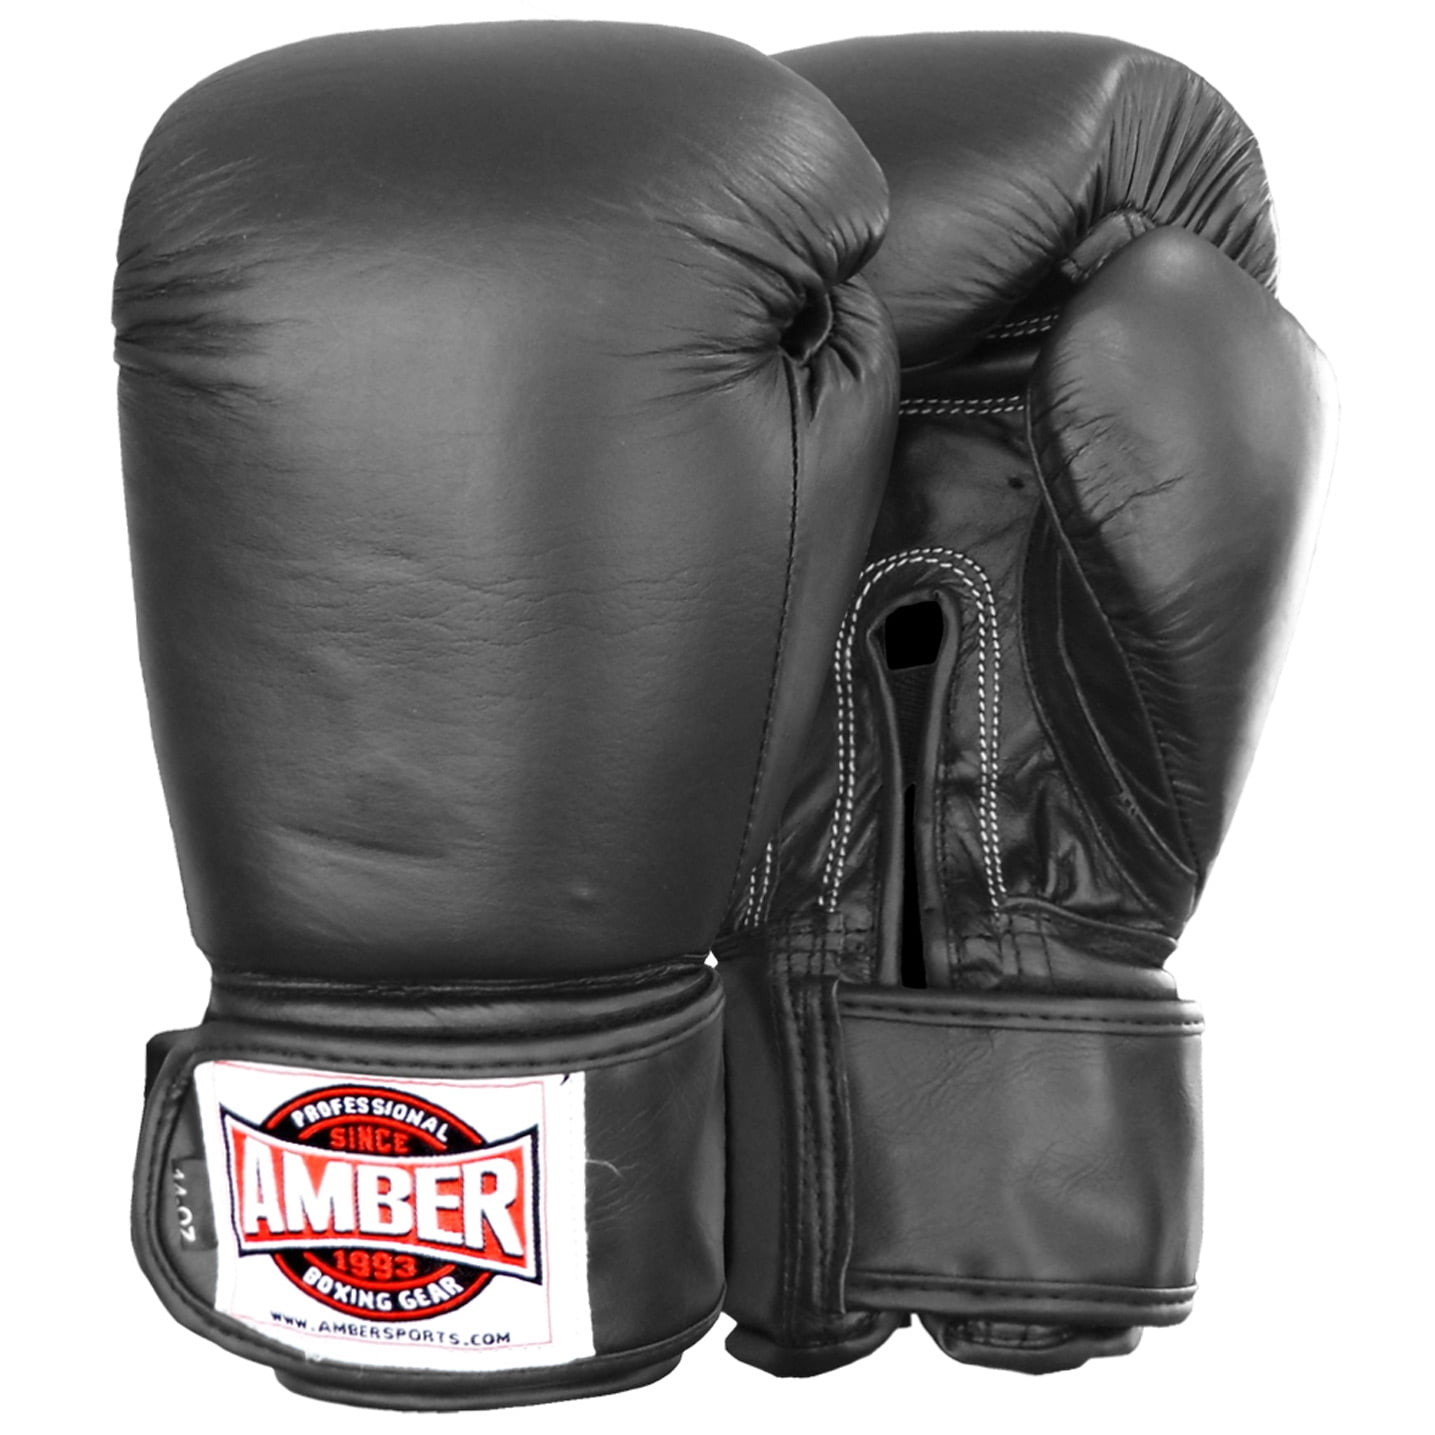 Amber Fight Gear Boxing MMA Kickboxing Protective Quick Handwraps 